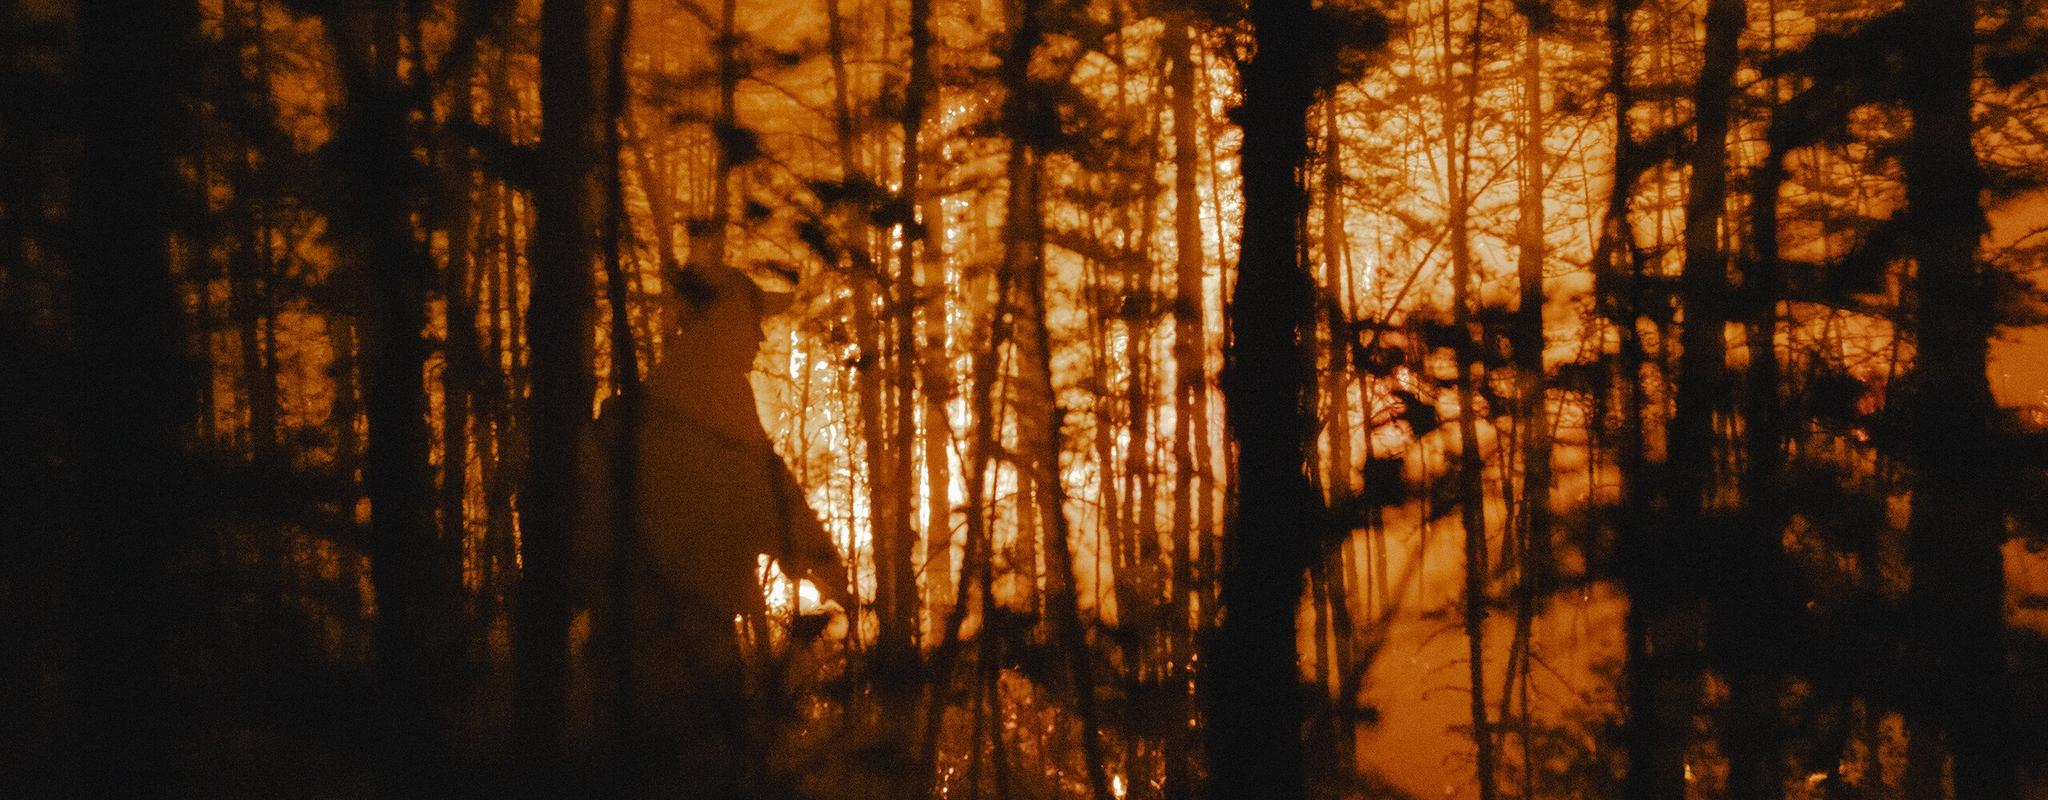 Trees in a forest appear in silhouette, backlit by bright orange flames filling the background. The silhouette of a person walking between the trees can be seen.